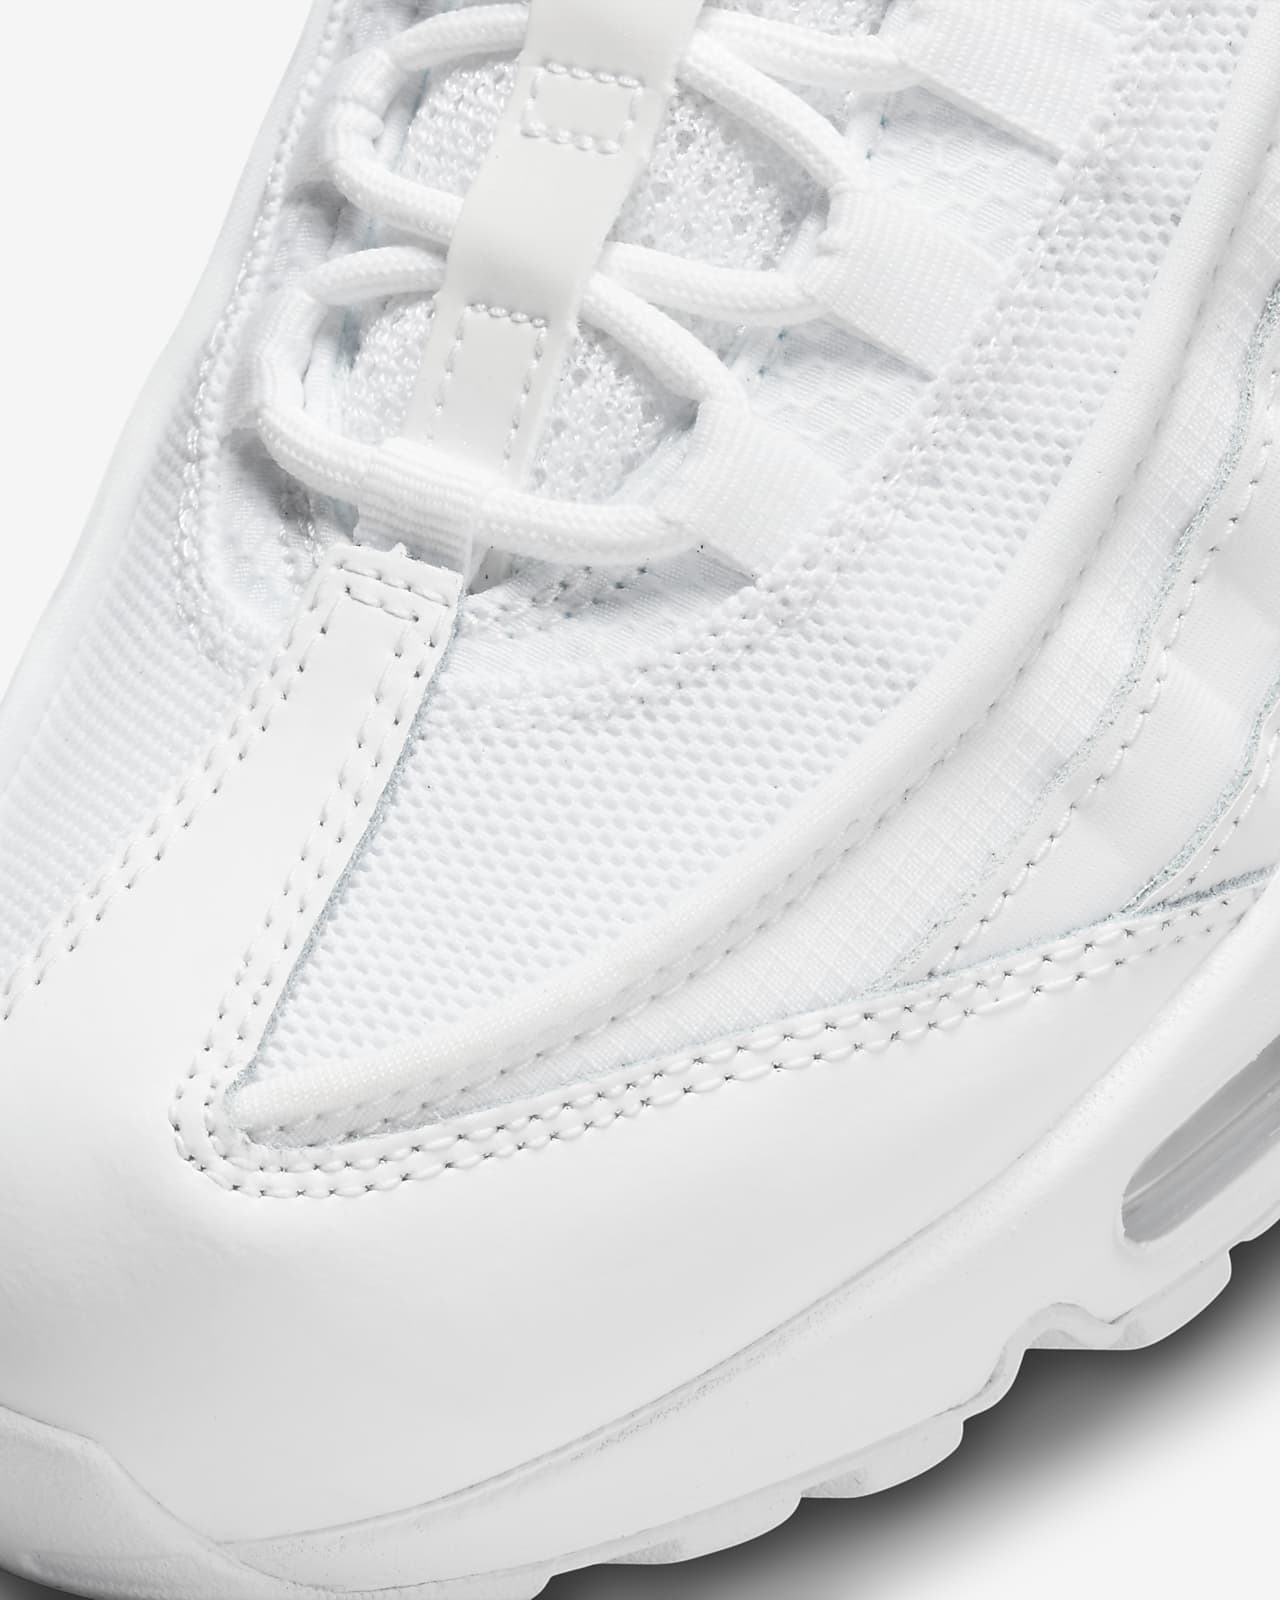 Chaussures Nike Air Max 95 pour Homme